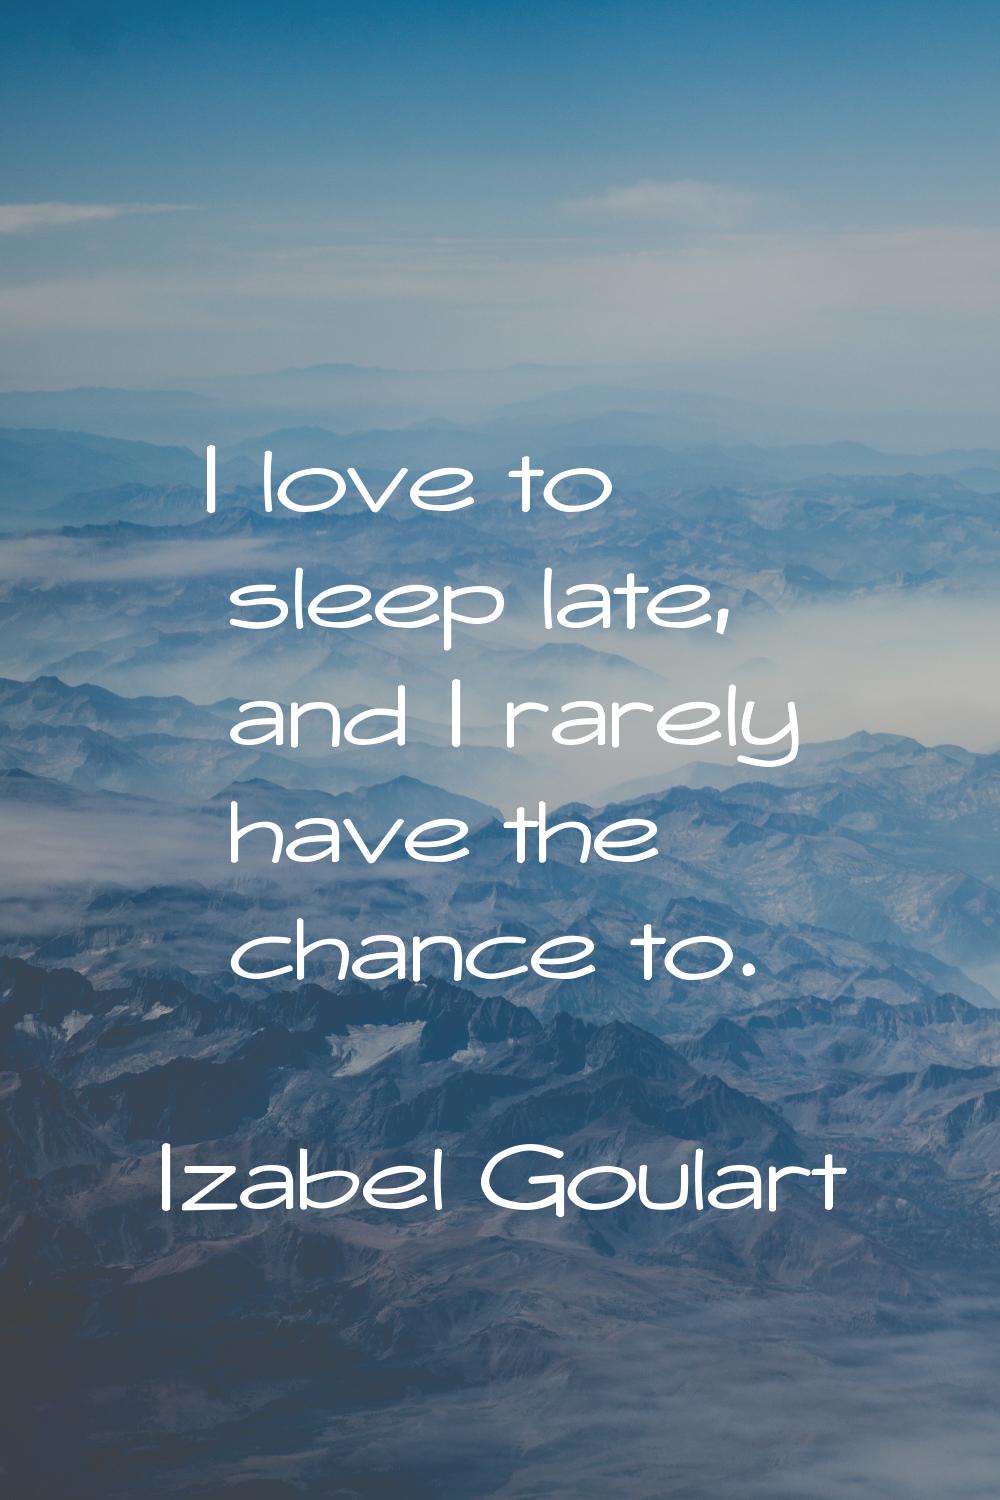 I love to sleep late, and I rarely have the chance to.